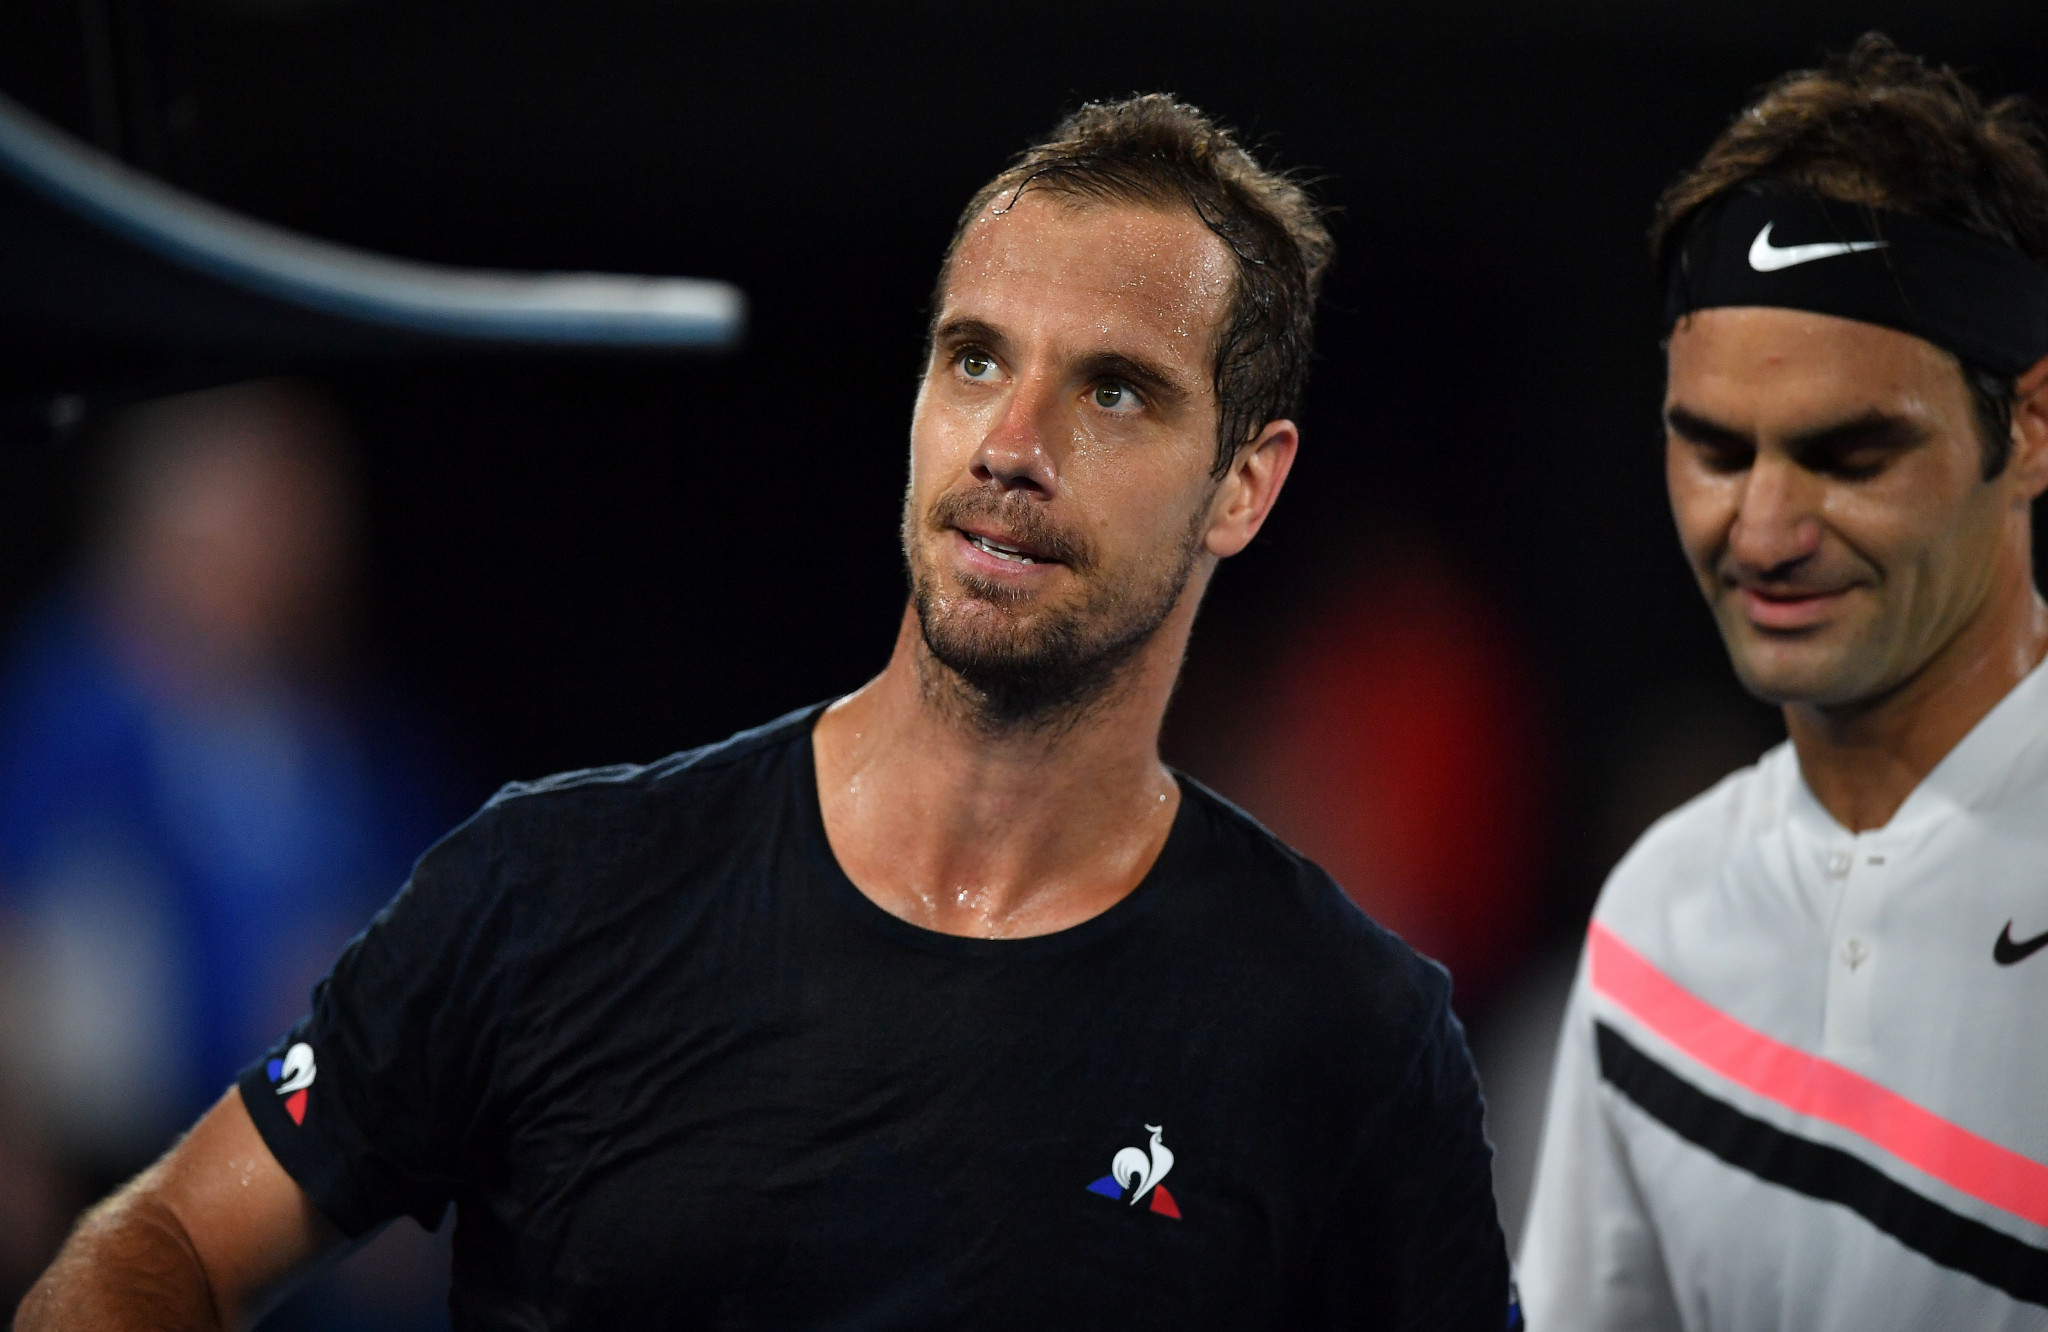 France's tennis player Richard Gasquet was also involved in doping kissing case ©Getty Images